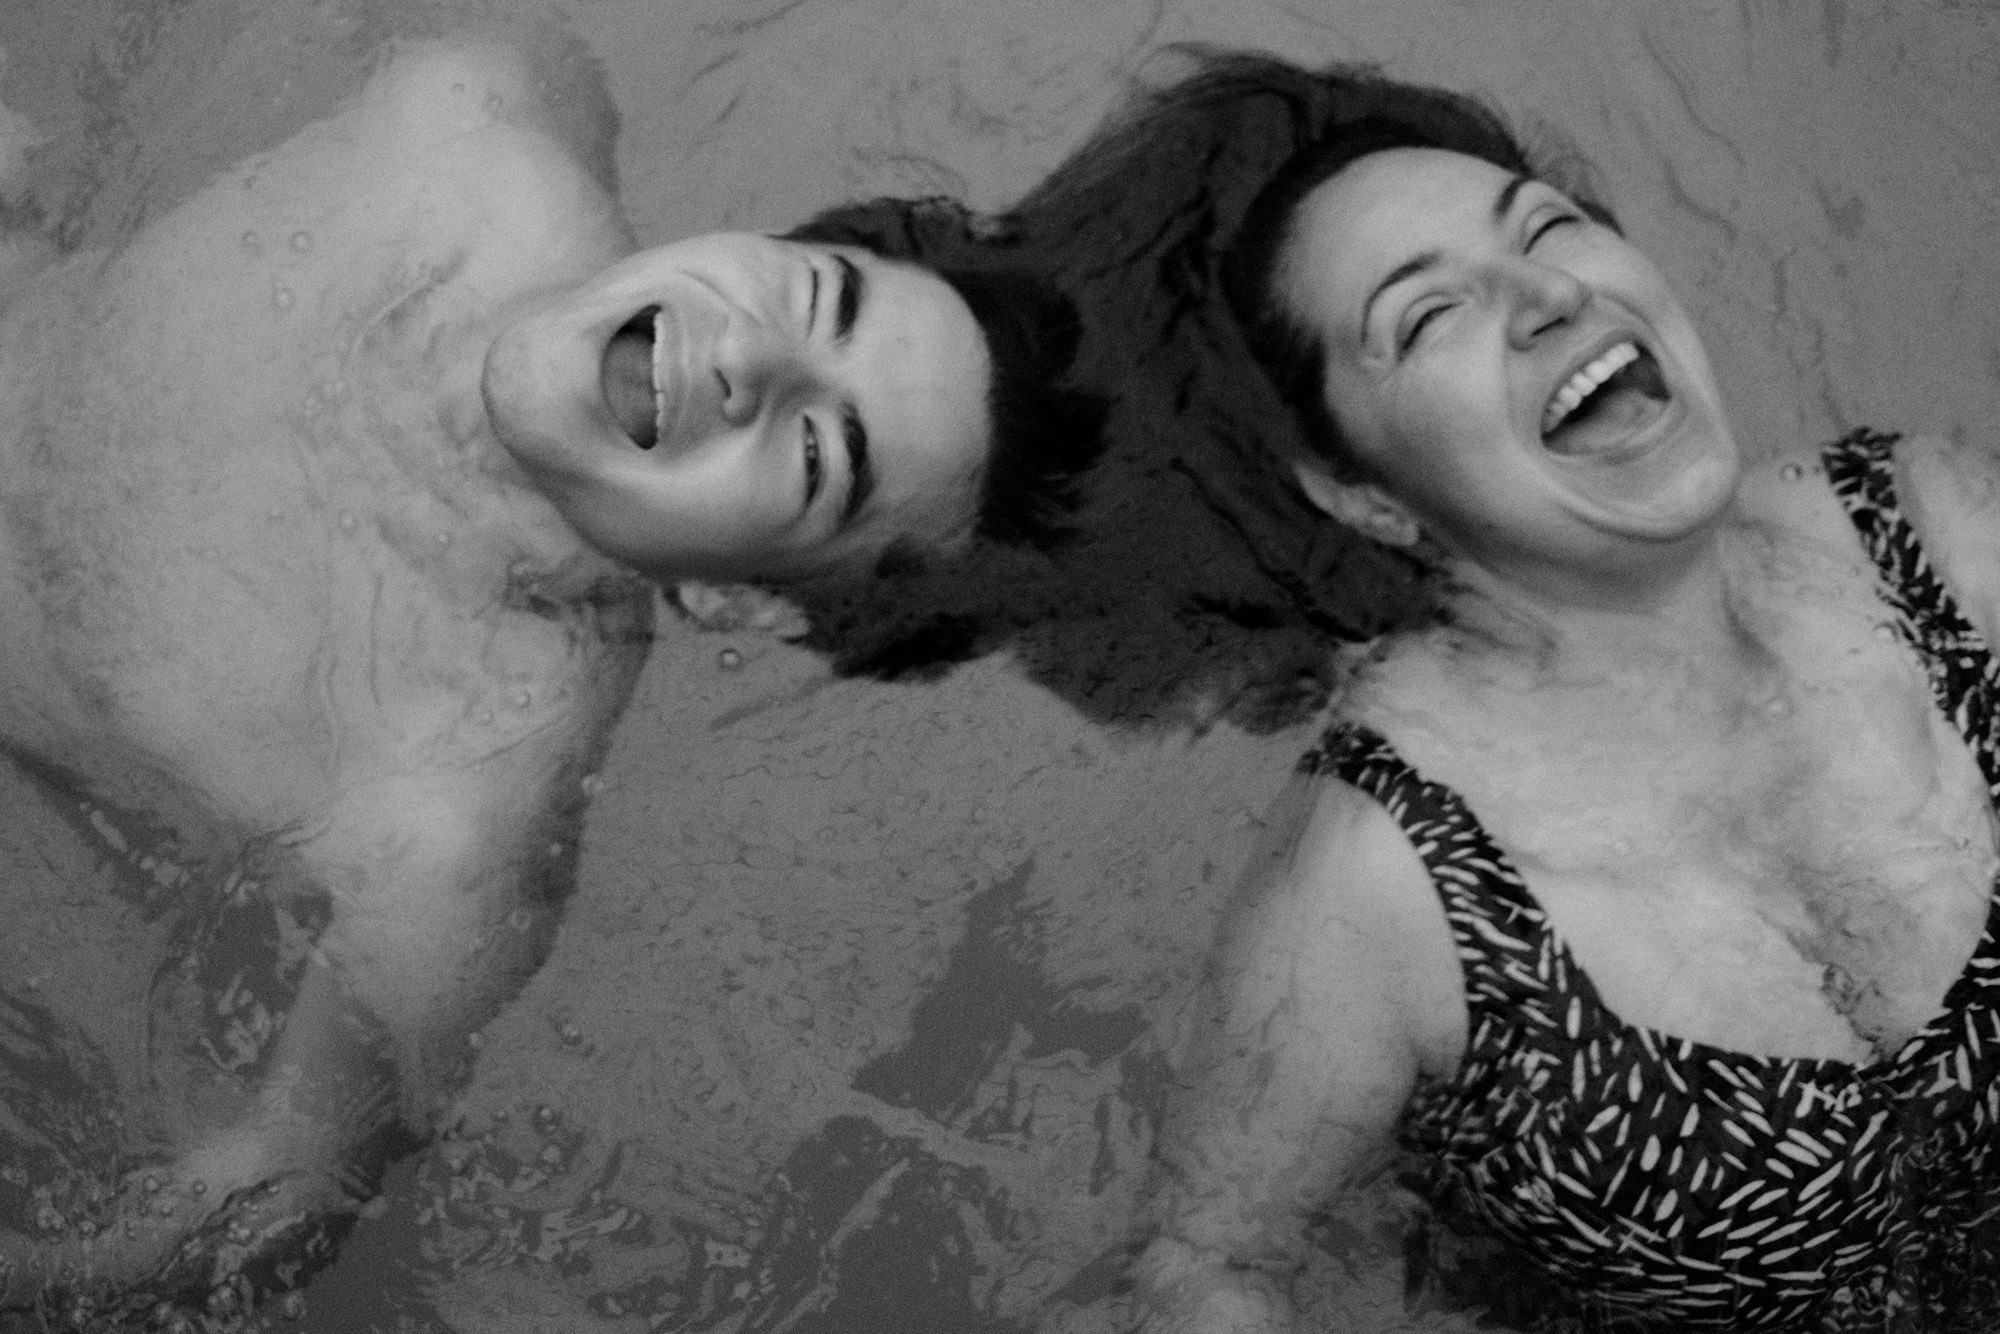 Image description: black-and-white image of the artist’s mother with her partner, laughing and looking at the sky while in a pool. Photo by Maryv Benoit.